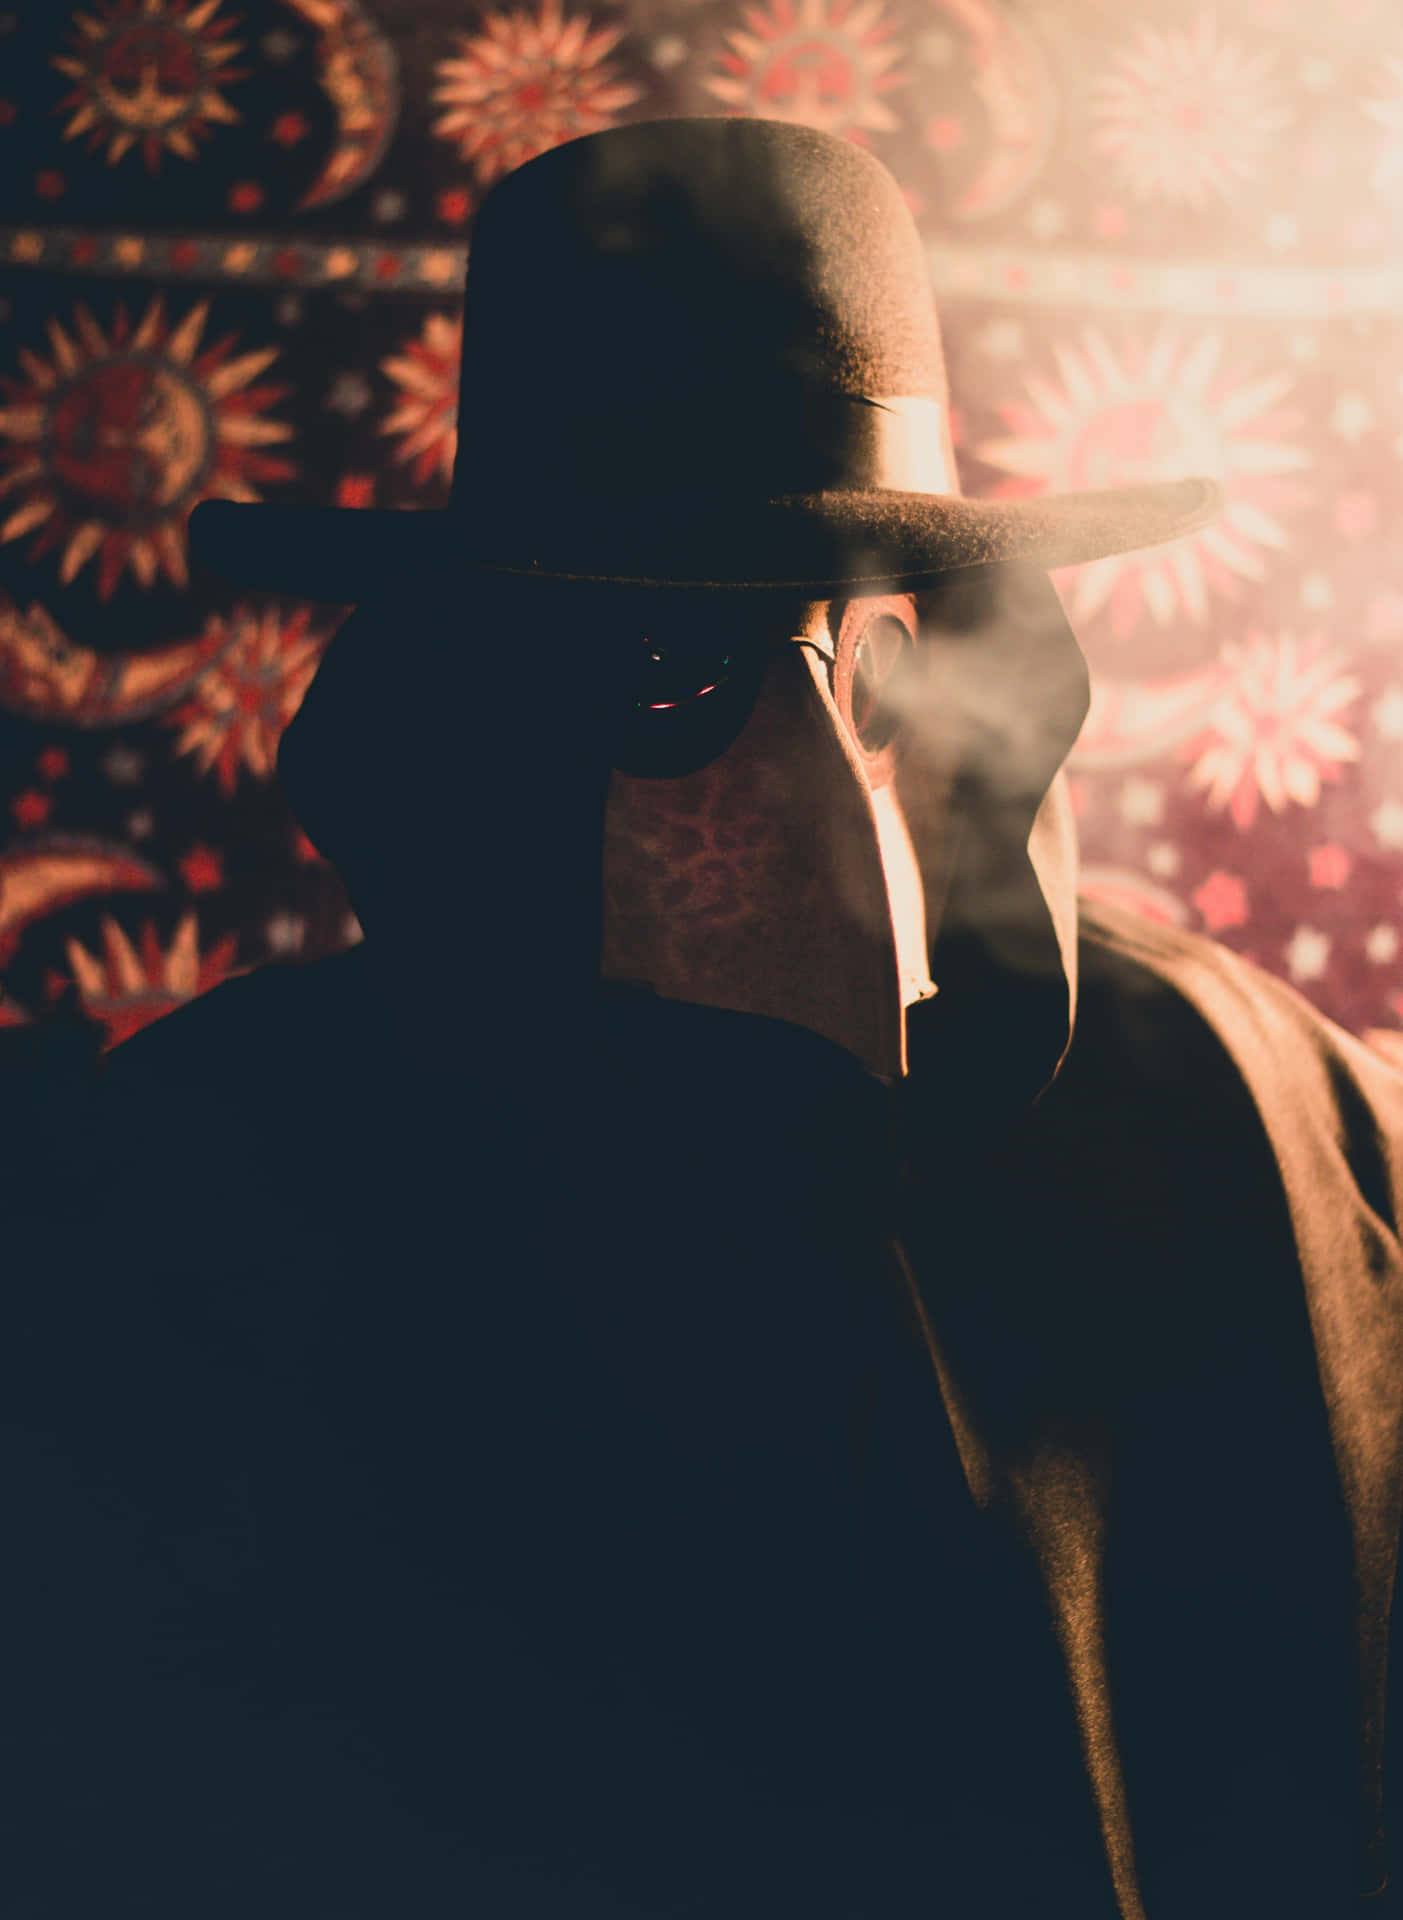 Mysterious Plague Doctor Silhouette Background